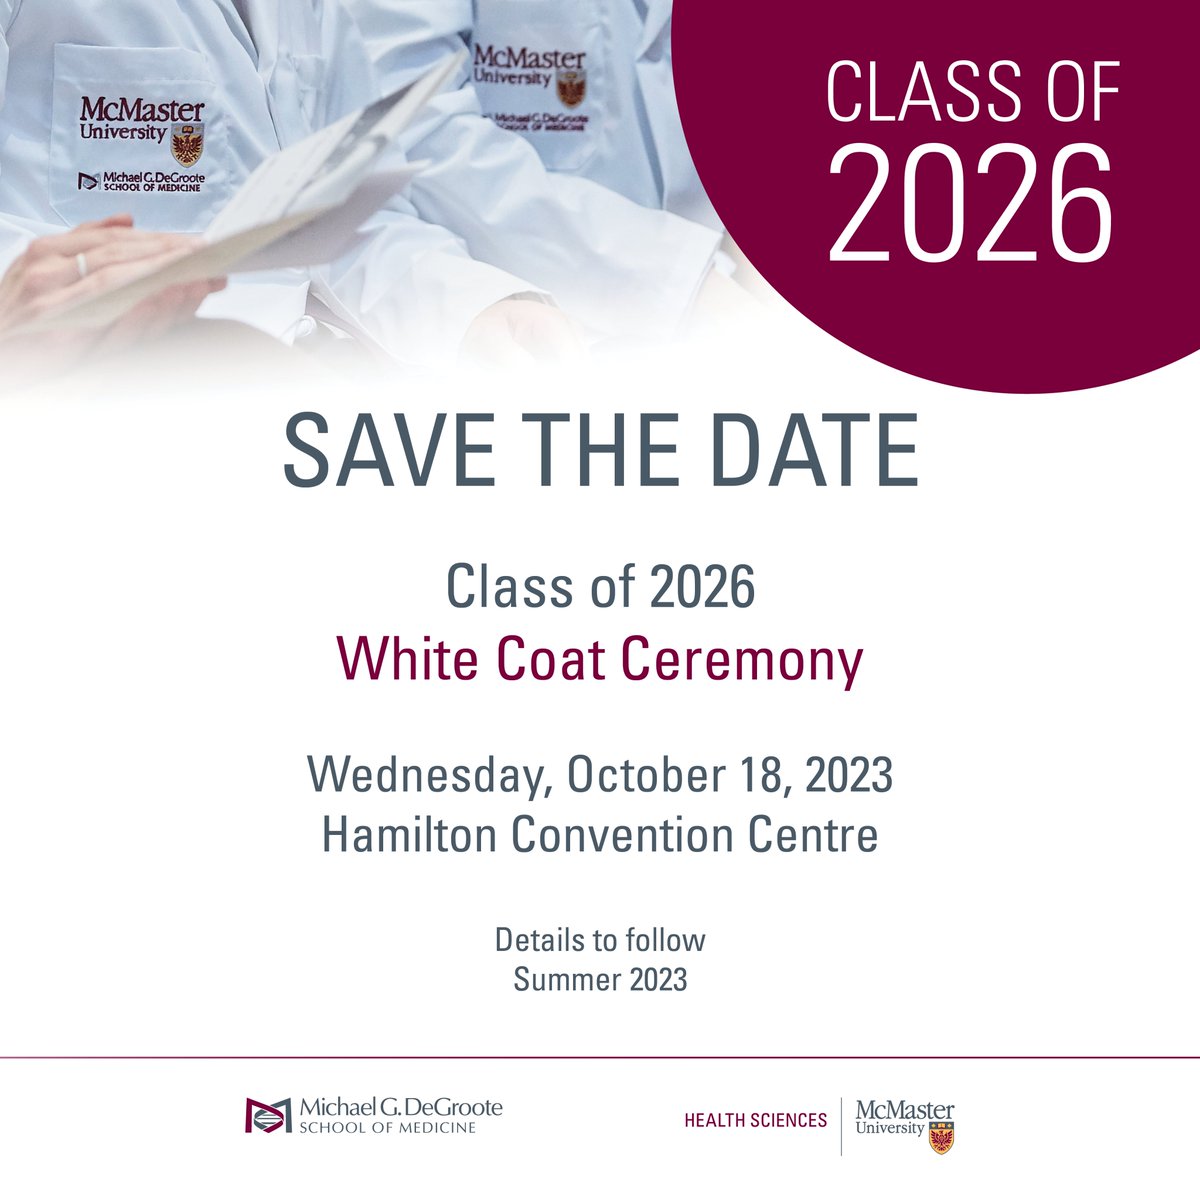 👩‍⚕️🎉 Save the Date! White Coat Ceremony - Class of 2026 🎉👨‍⚕️